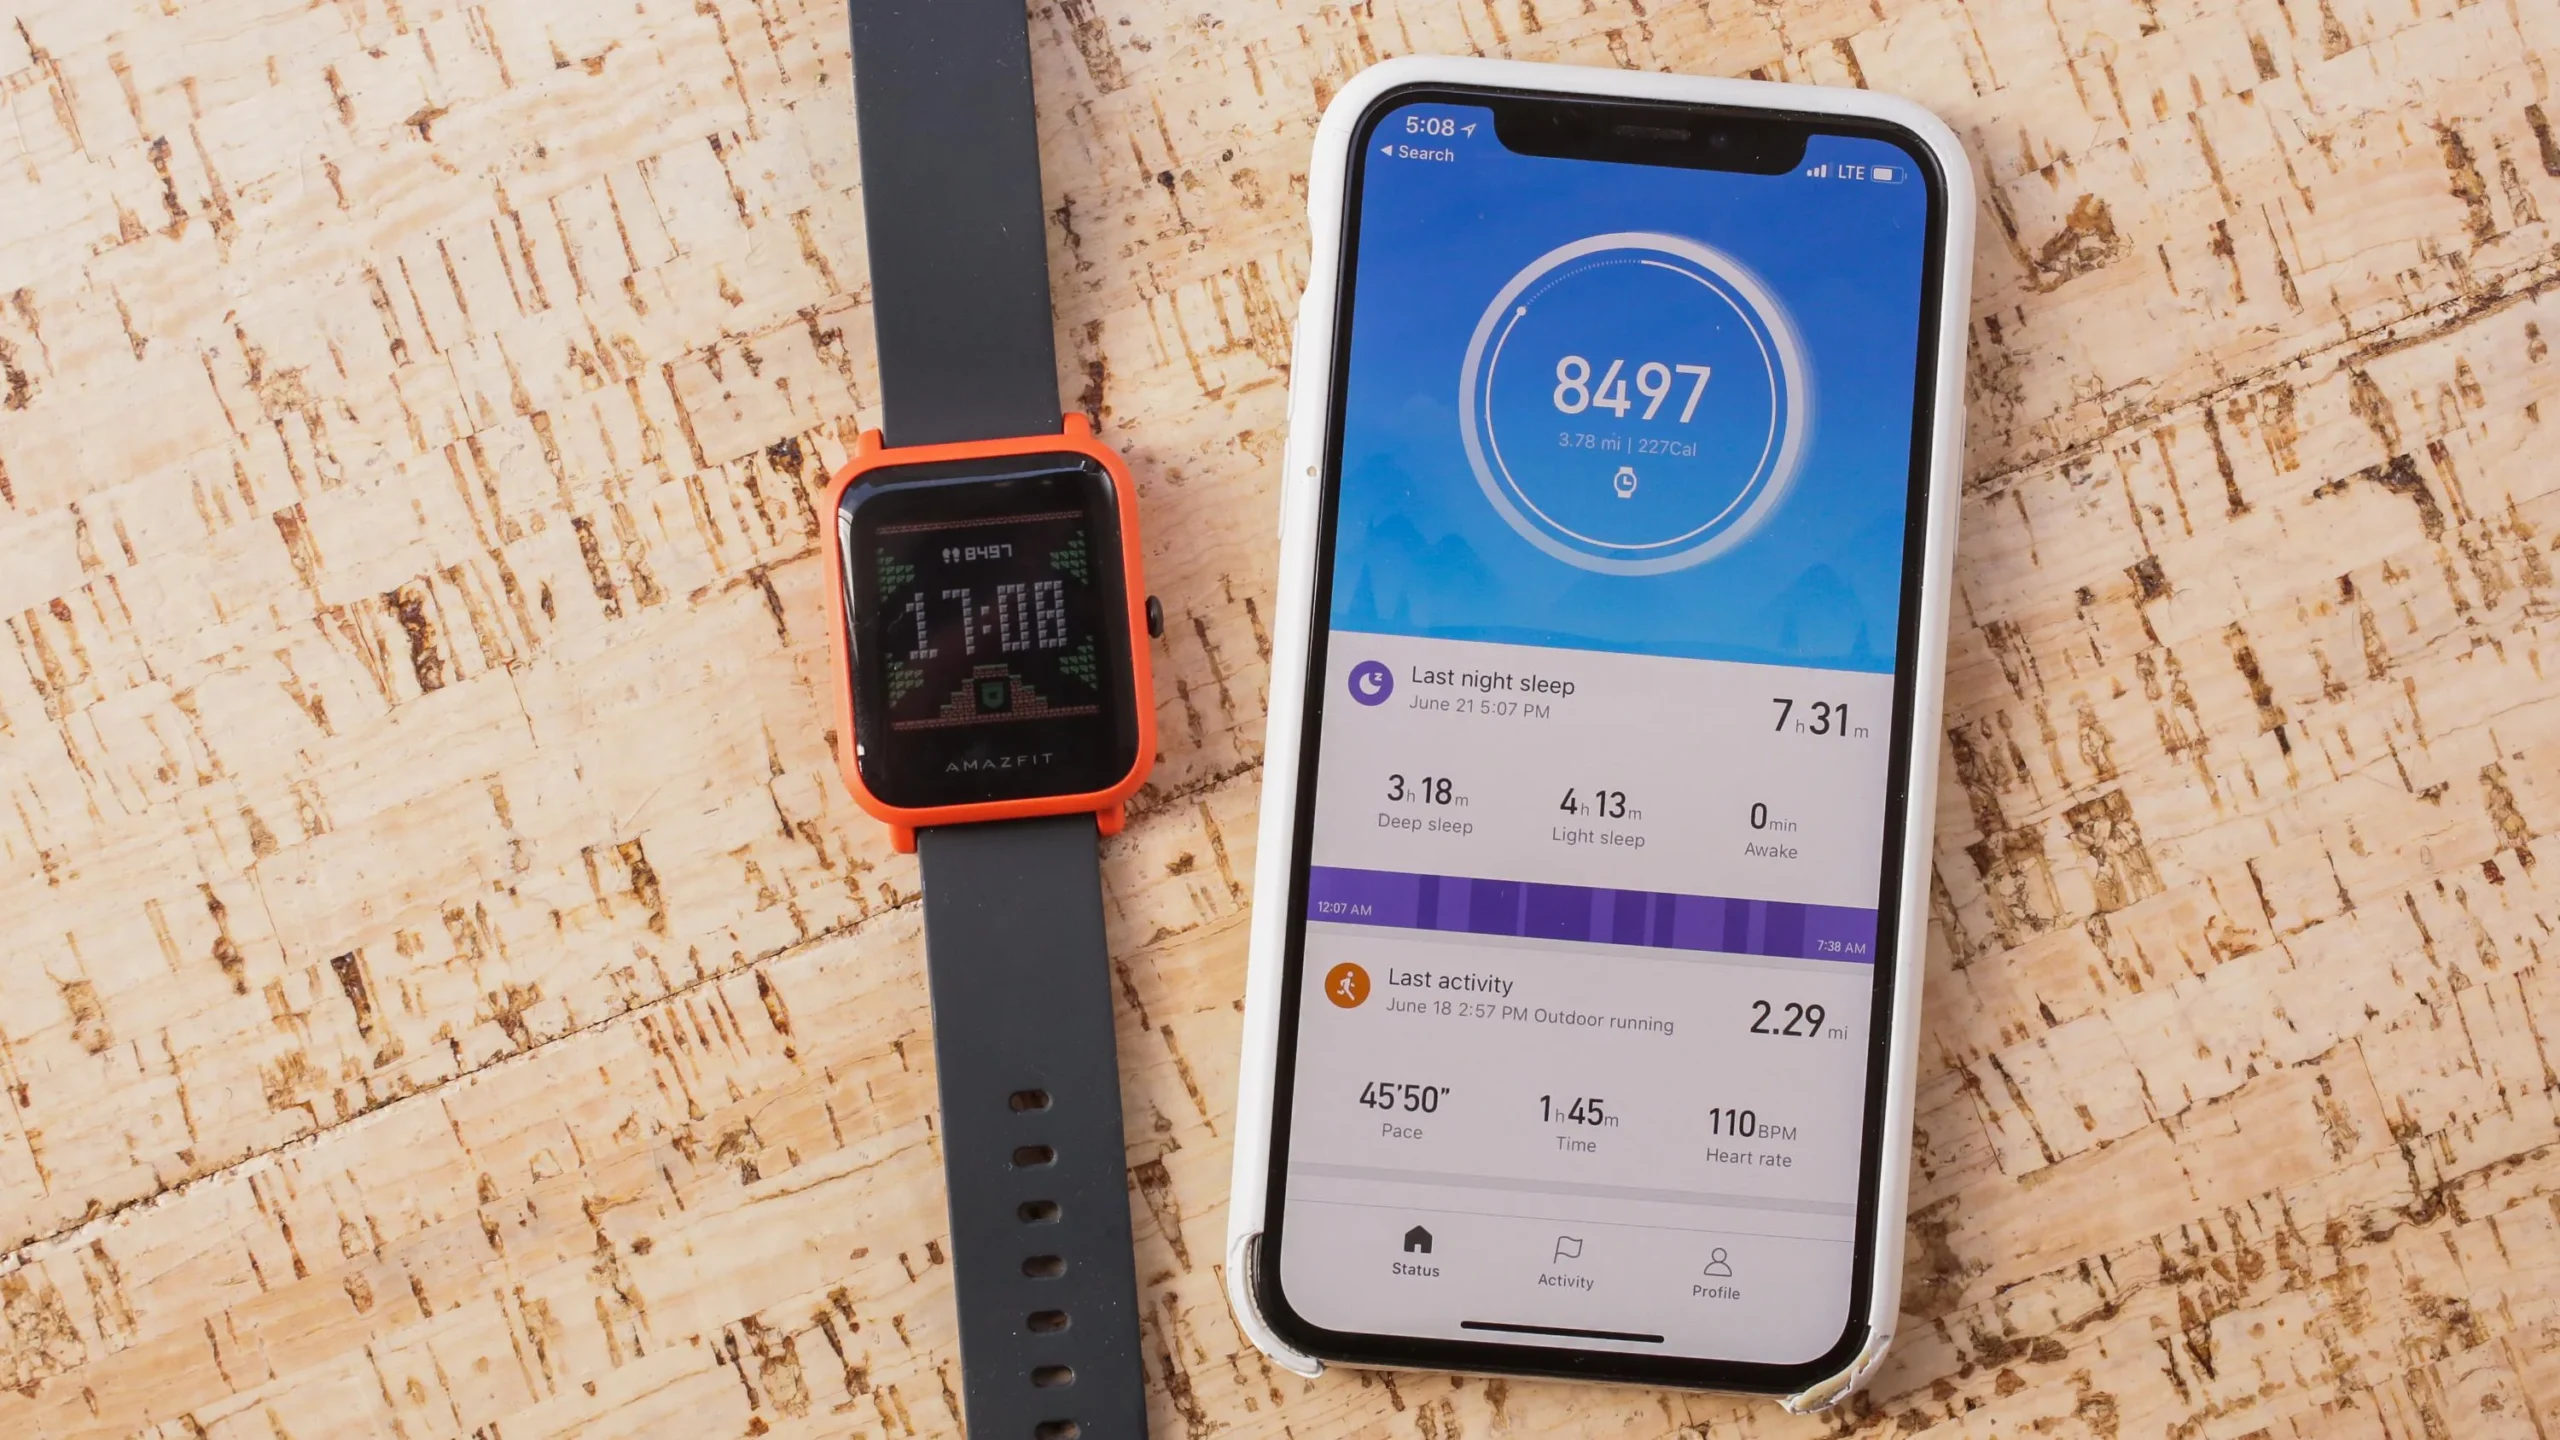 Amazfit Watch to an iPhone